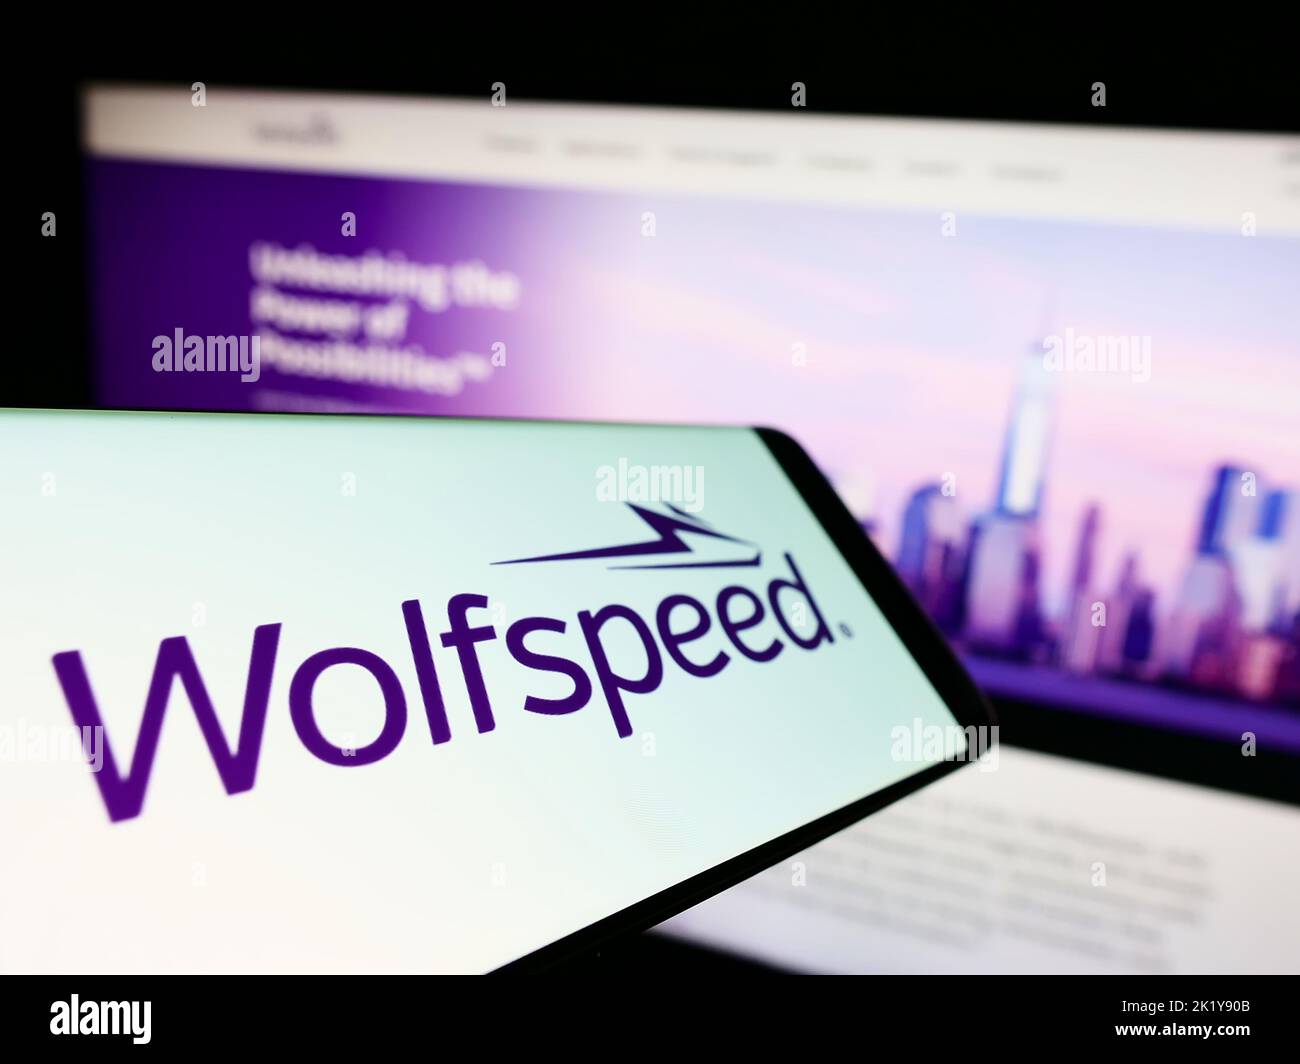 Mobile phone with logo of American semiconductor company Wolfspeed Inc. on screen in front of business website. Focus on center of phone display. Stock Photo